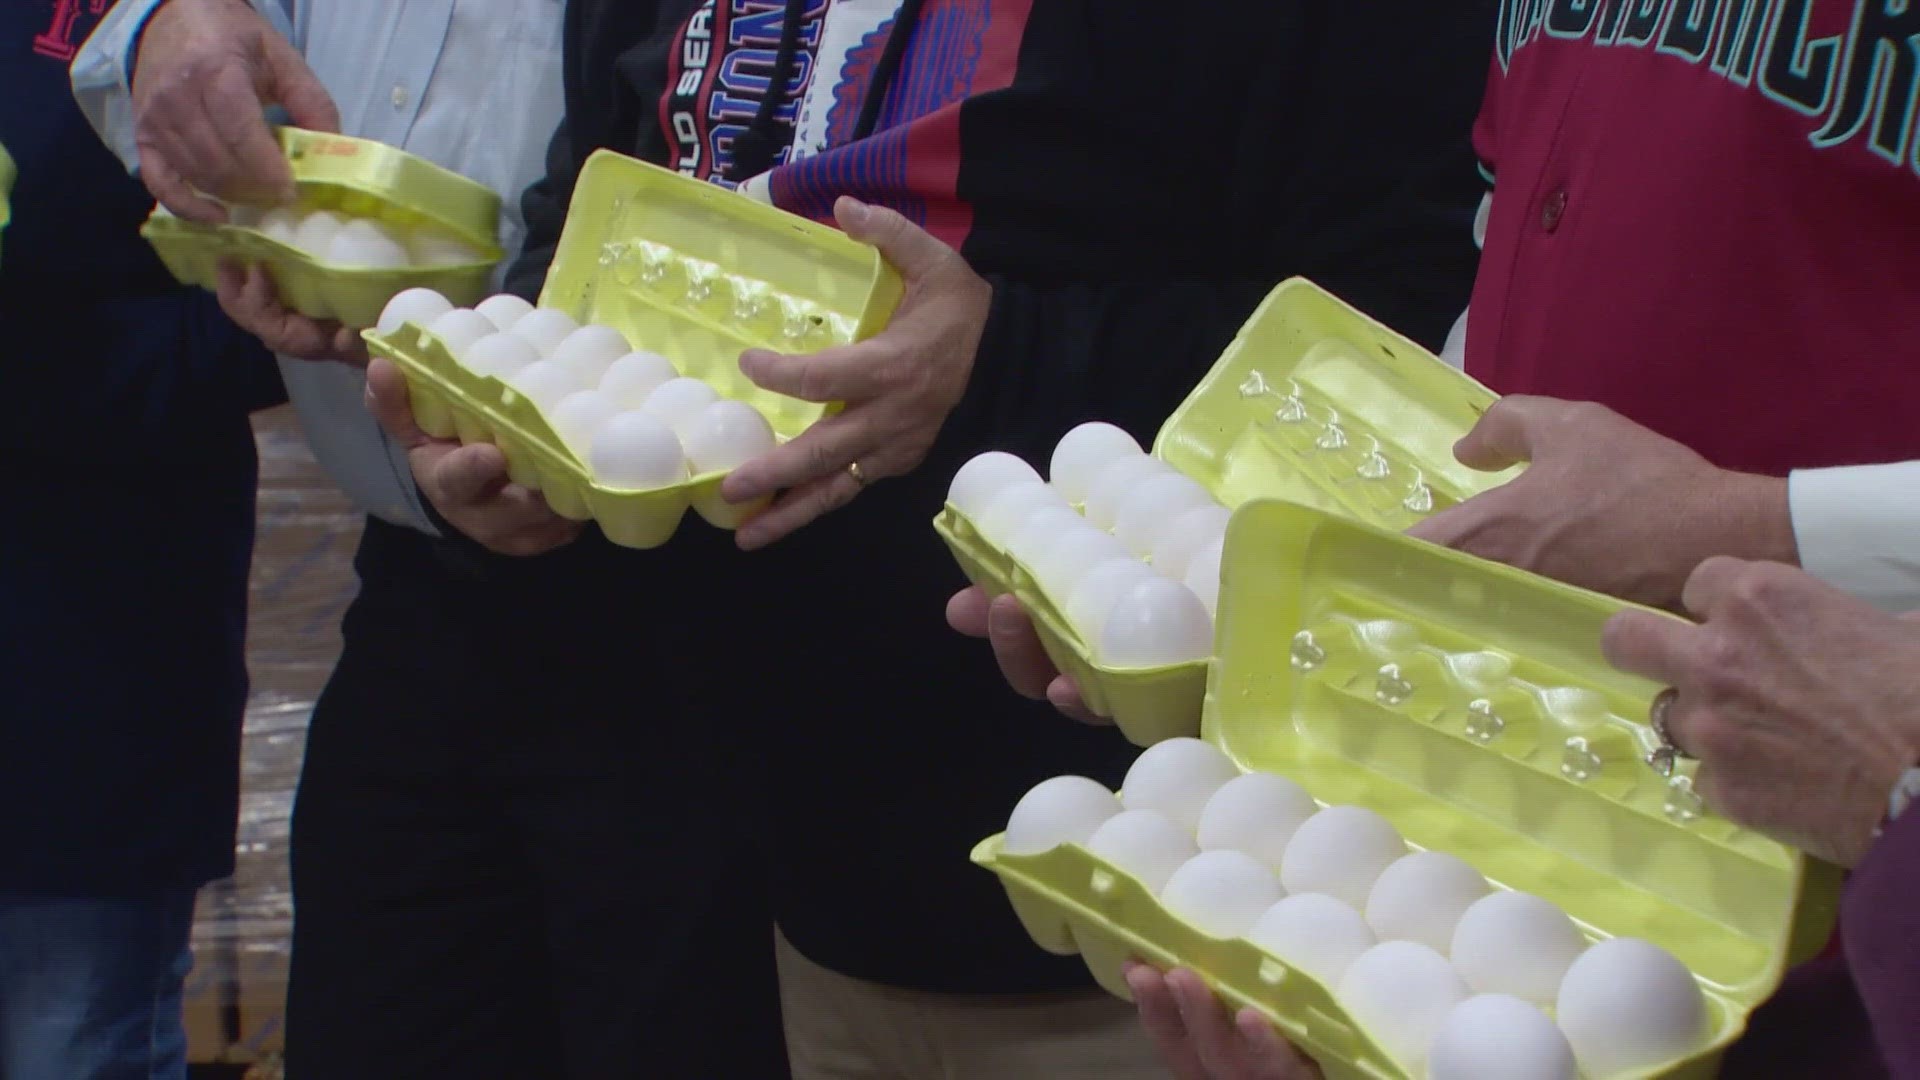 A friendly wager between a Tarrant County judge and an Arizona County chairman led to this: A donation of nearly 52,000 eggs.